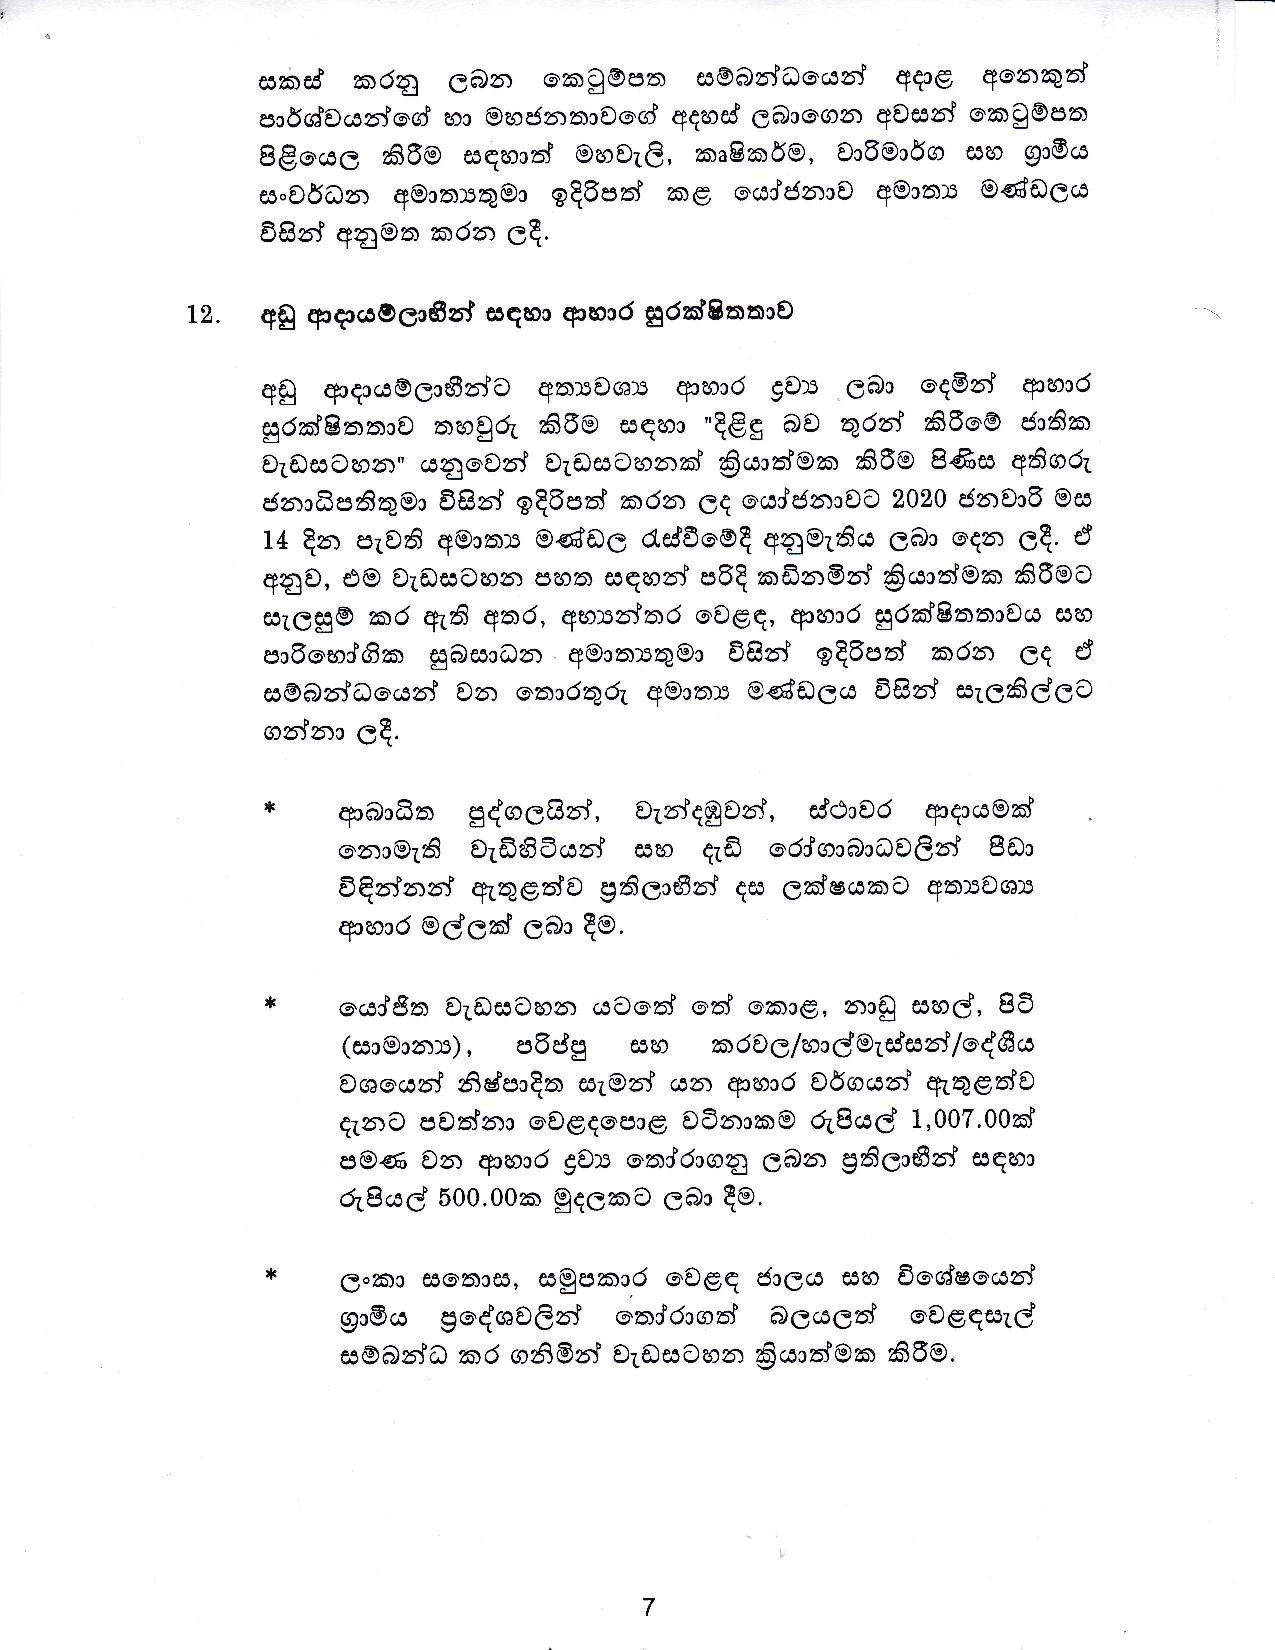 Cabinet Decision on 04.03.2020 page 007